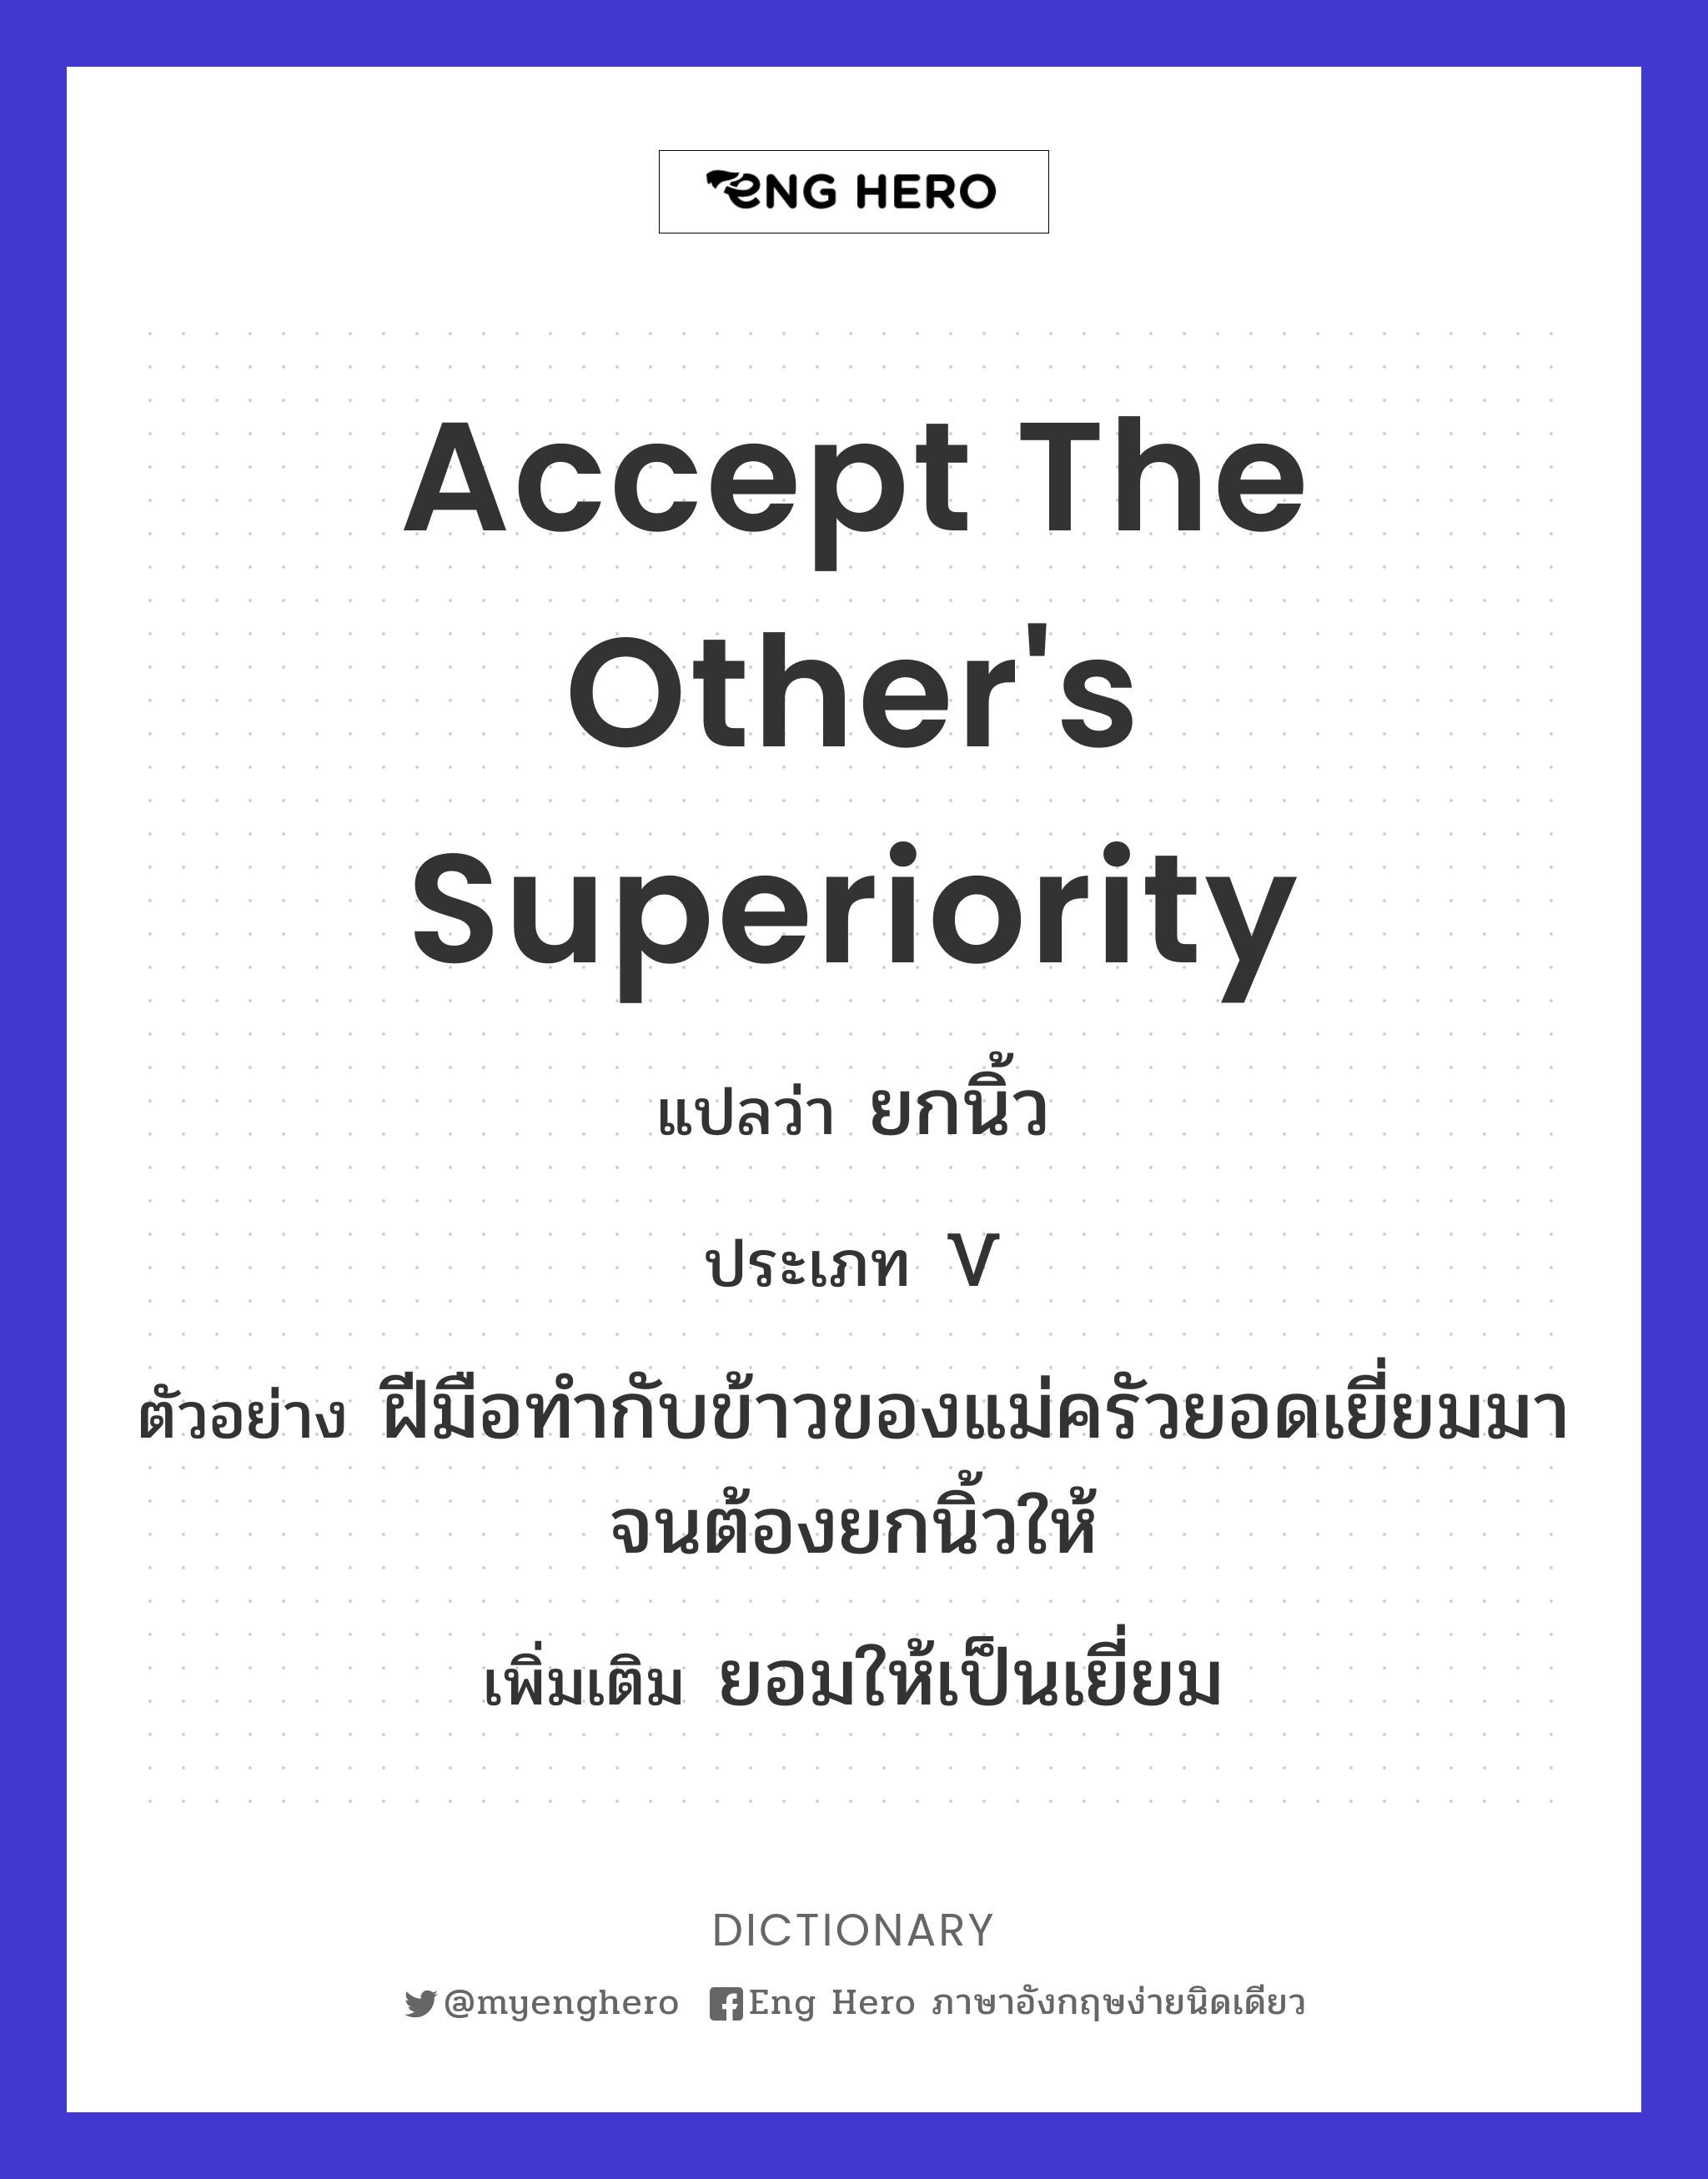 accept the other's superiority